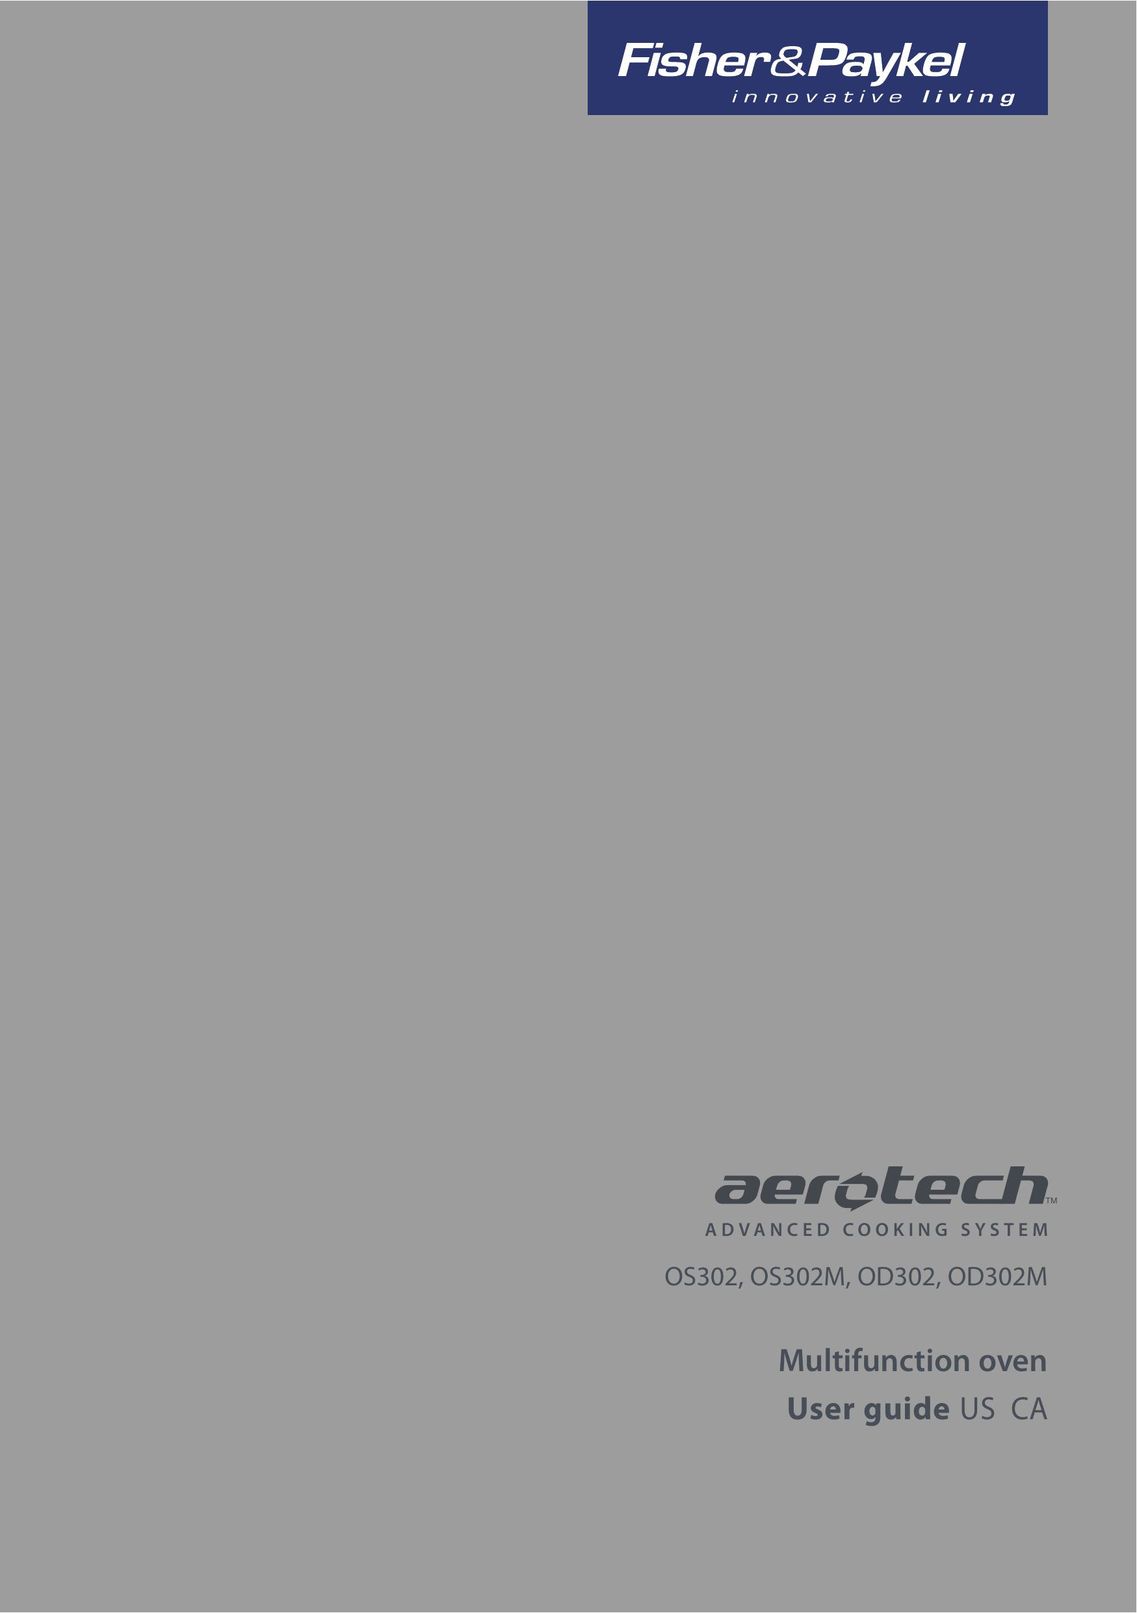 Fisher & Paykel OD302 Microwave Oven User Manual